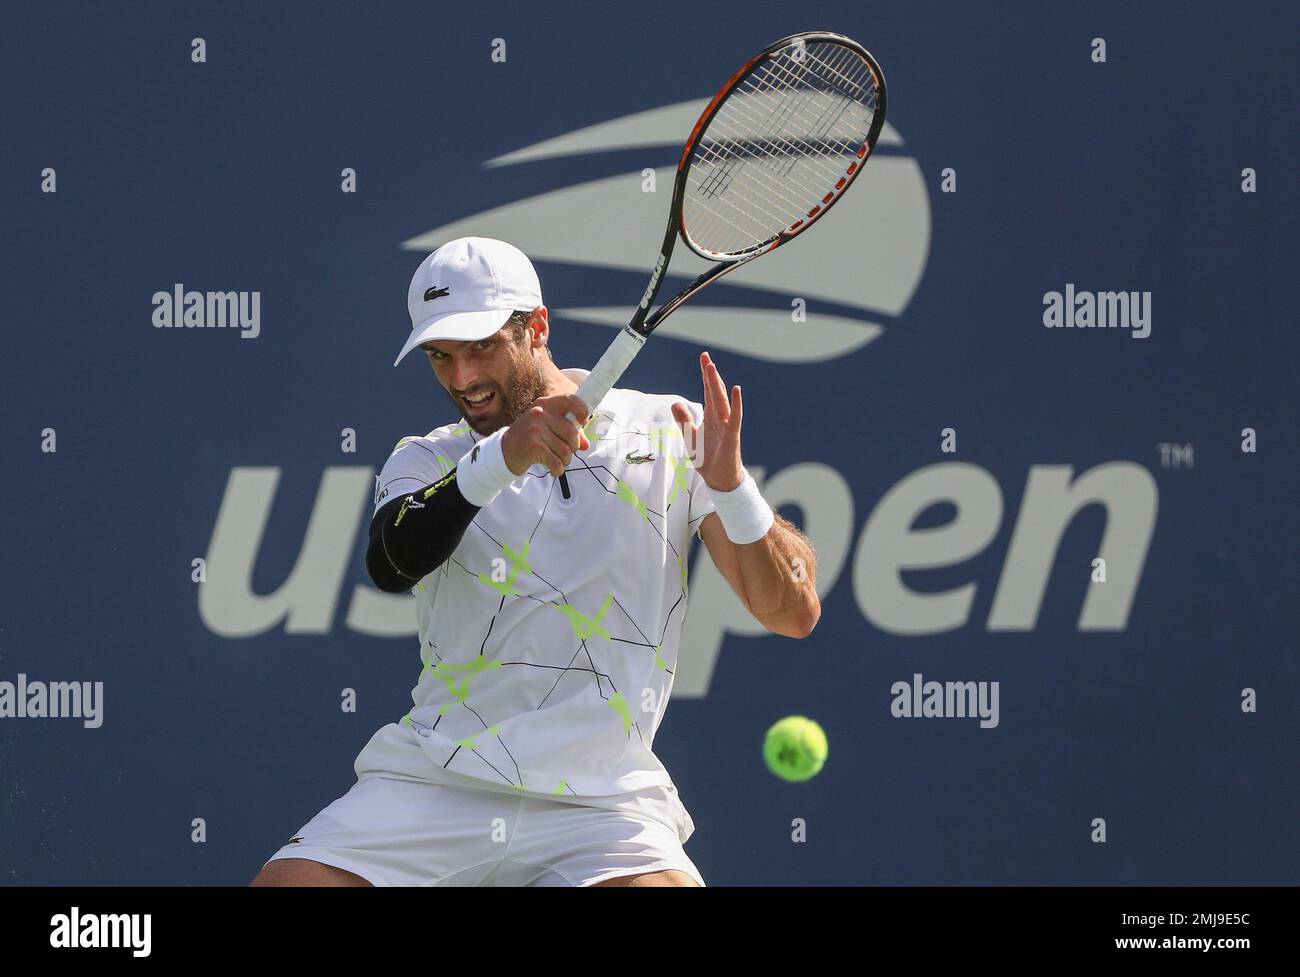 Pablo Andujar, of Spain, returns a shot to Alexander Bublik, of Kazakhstan, during round three of the US Open tennis championships Saturday, Aug